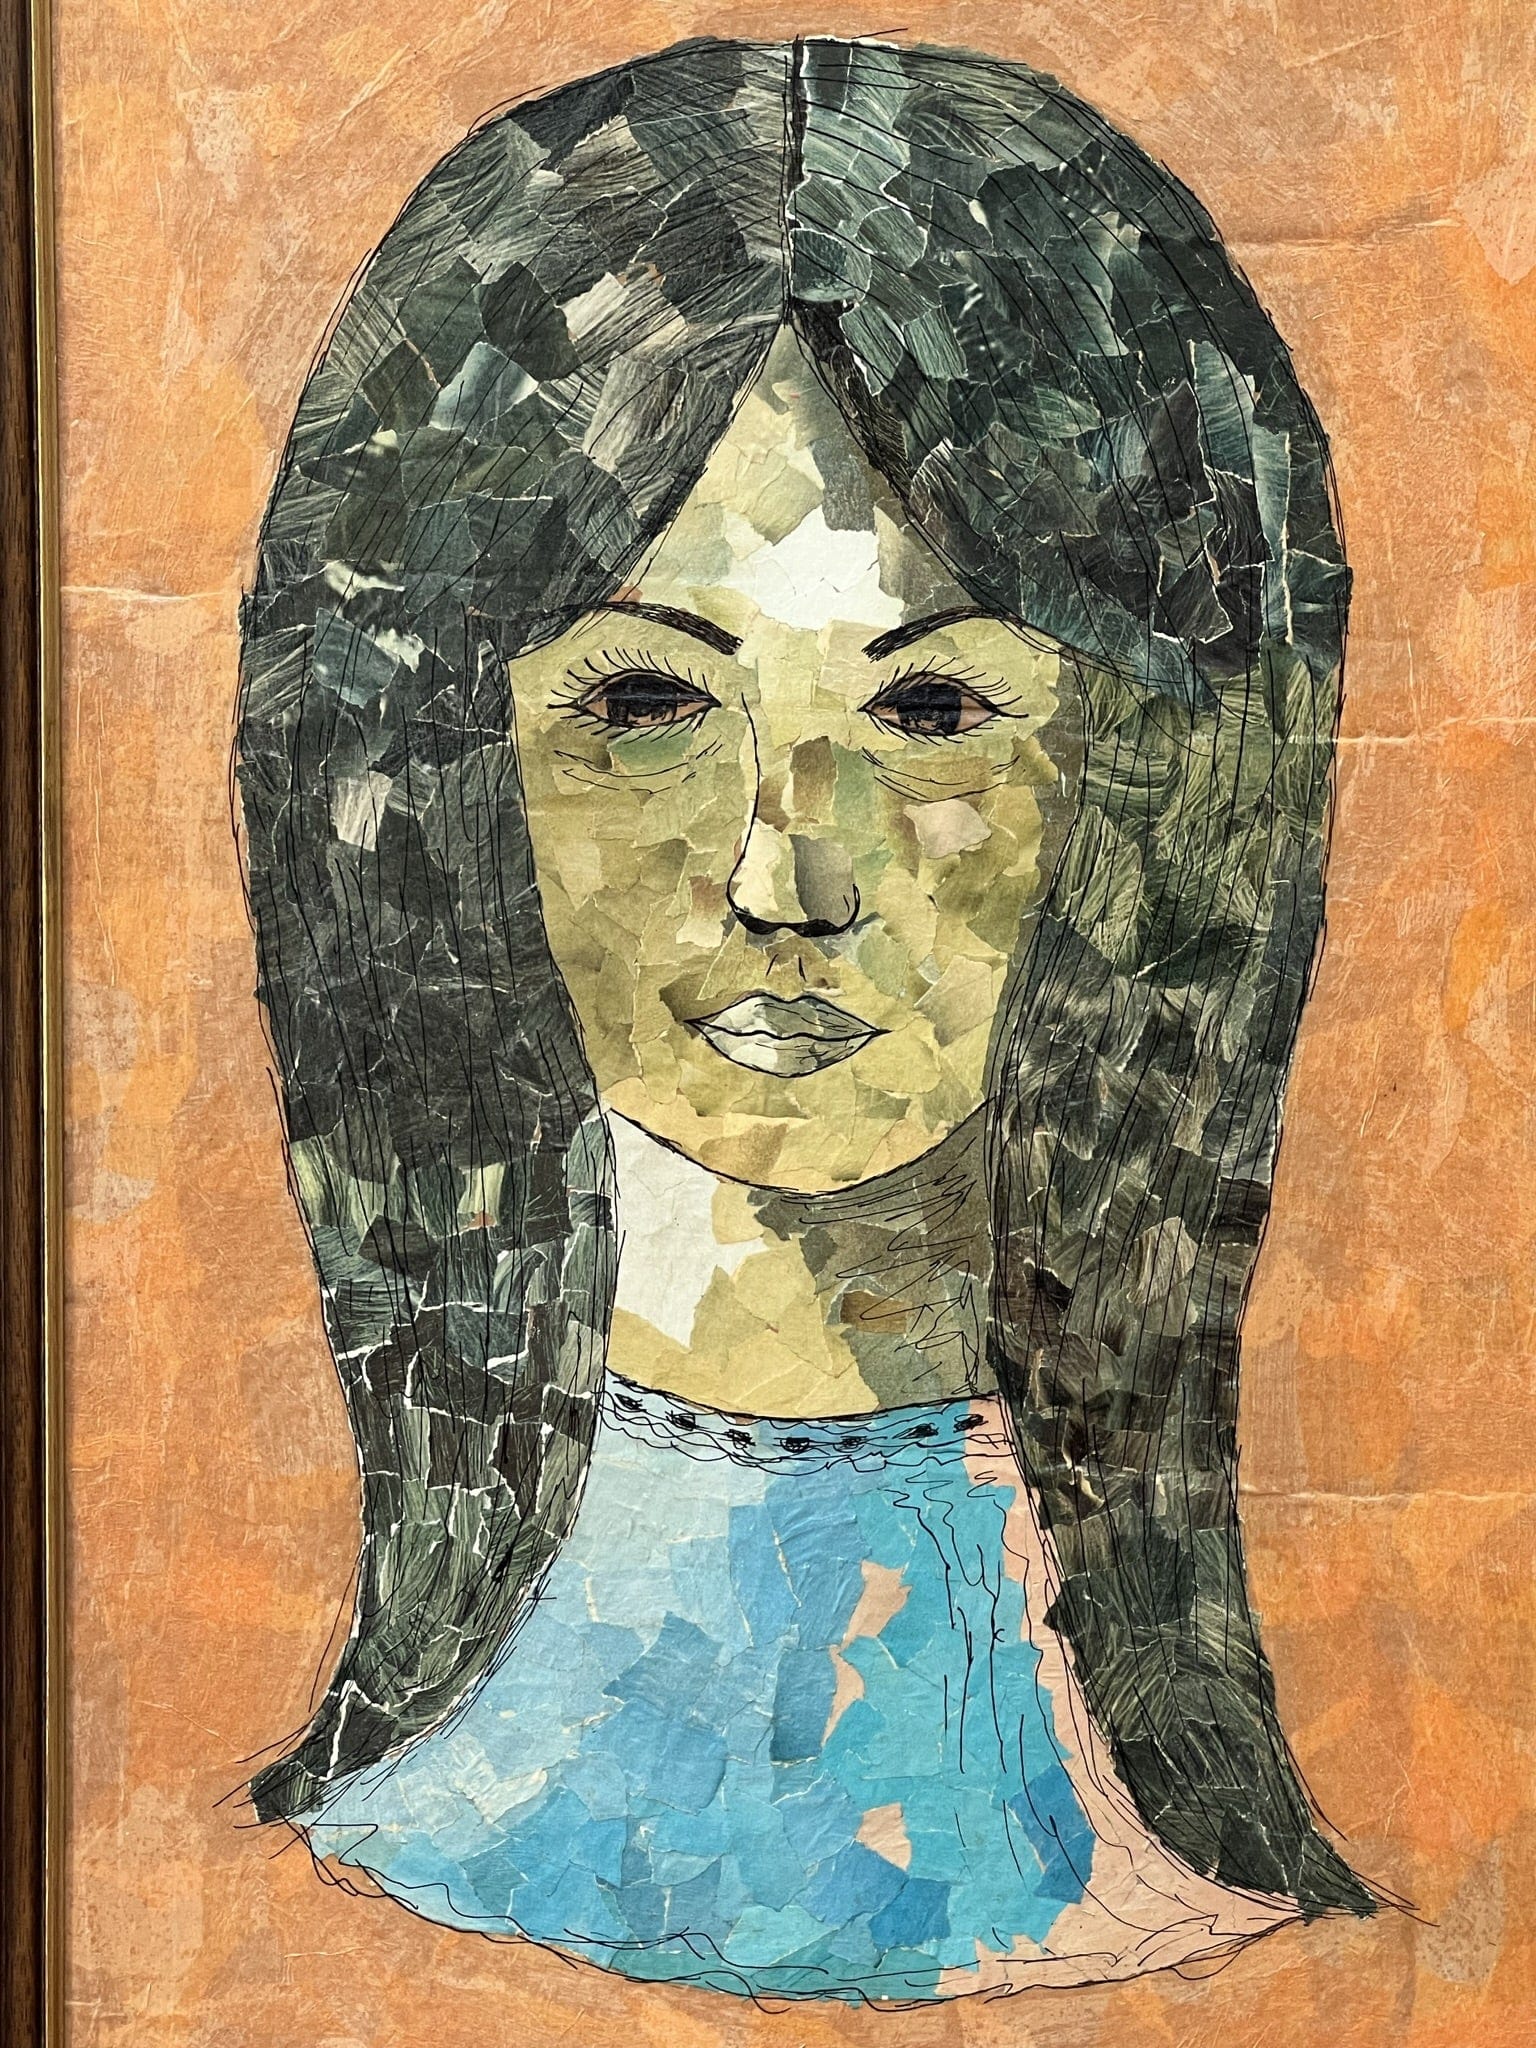 I Like Mike's Mid Century Modern Wall Decor & Art Large Framed Montage Portrait of a Young Woman, 1970s Collage Art